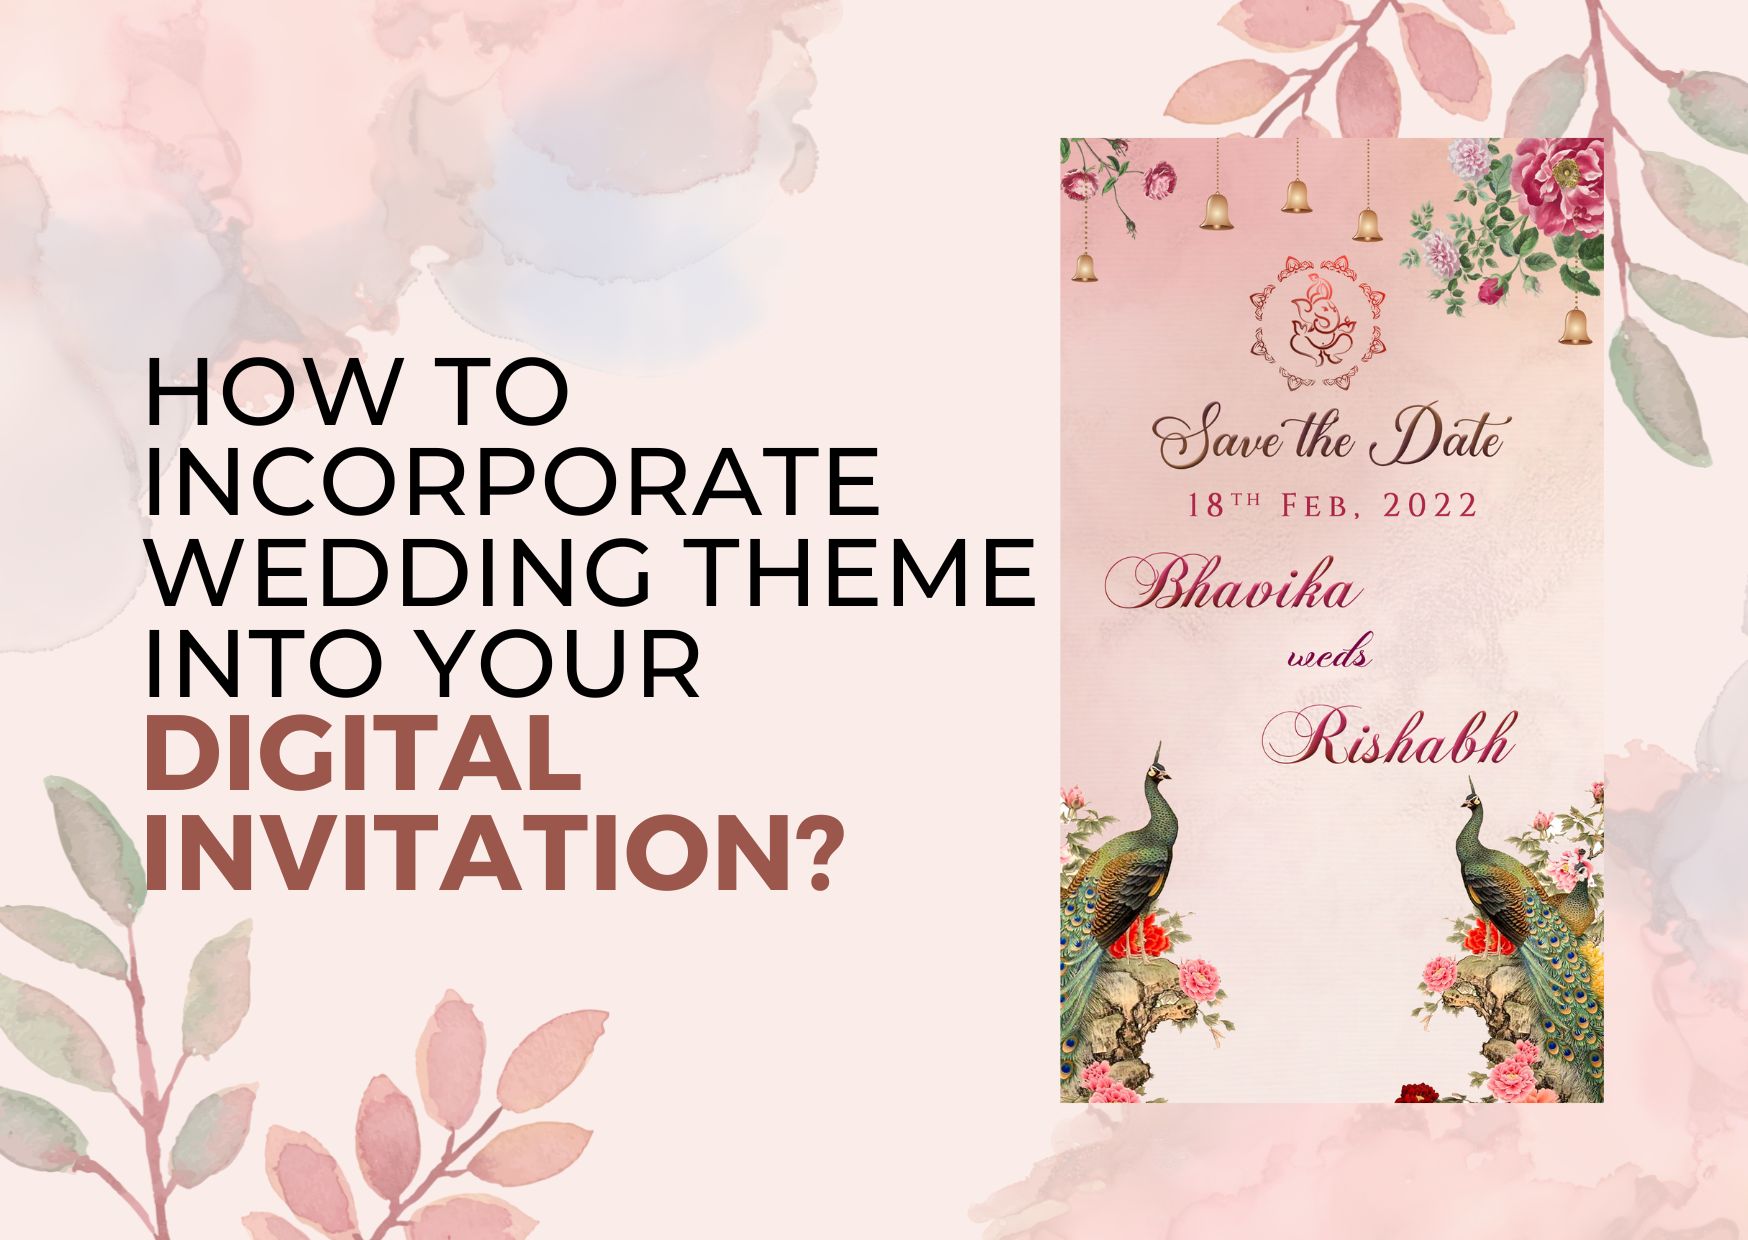 How to Incorporate Wedding Theme Into Your Digital Invitation?